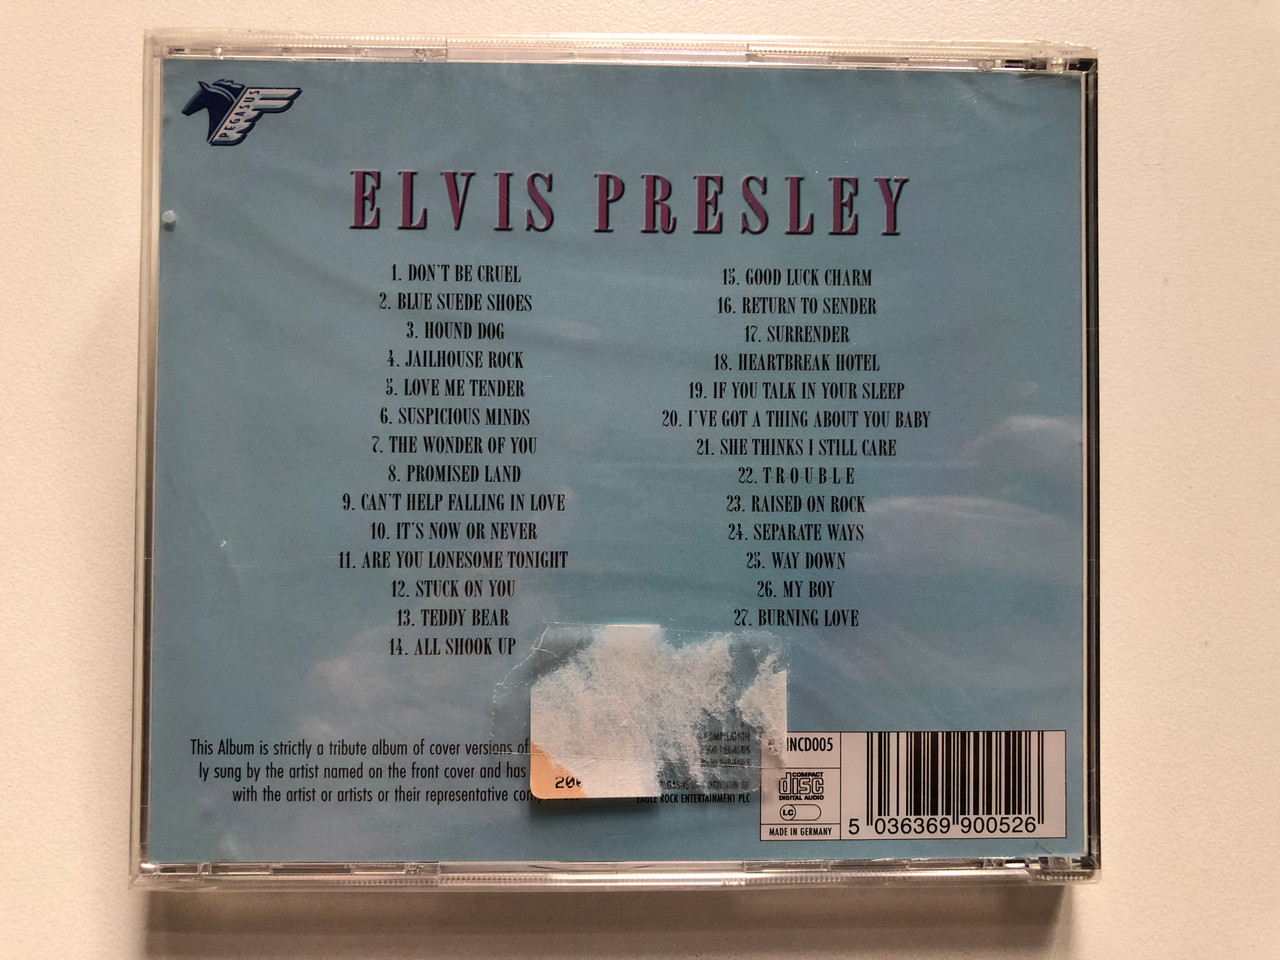 https://cdn11.bigcommerce.com/s-62bdpkt7pb/products/0/images/332797/Elvis_Presley_I_Cant_Believe_Its_Not..._-_Tracks_performed_by_Lesley_Prives_include_Heartbreak_Hotel_Blue_Suede_Shoes_Jaihouse_Rock_Audio_CD_ICBINCD005_2__00422.1714643615.1280.1280.JPG?c=2